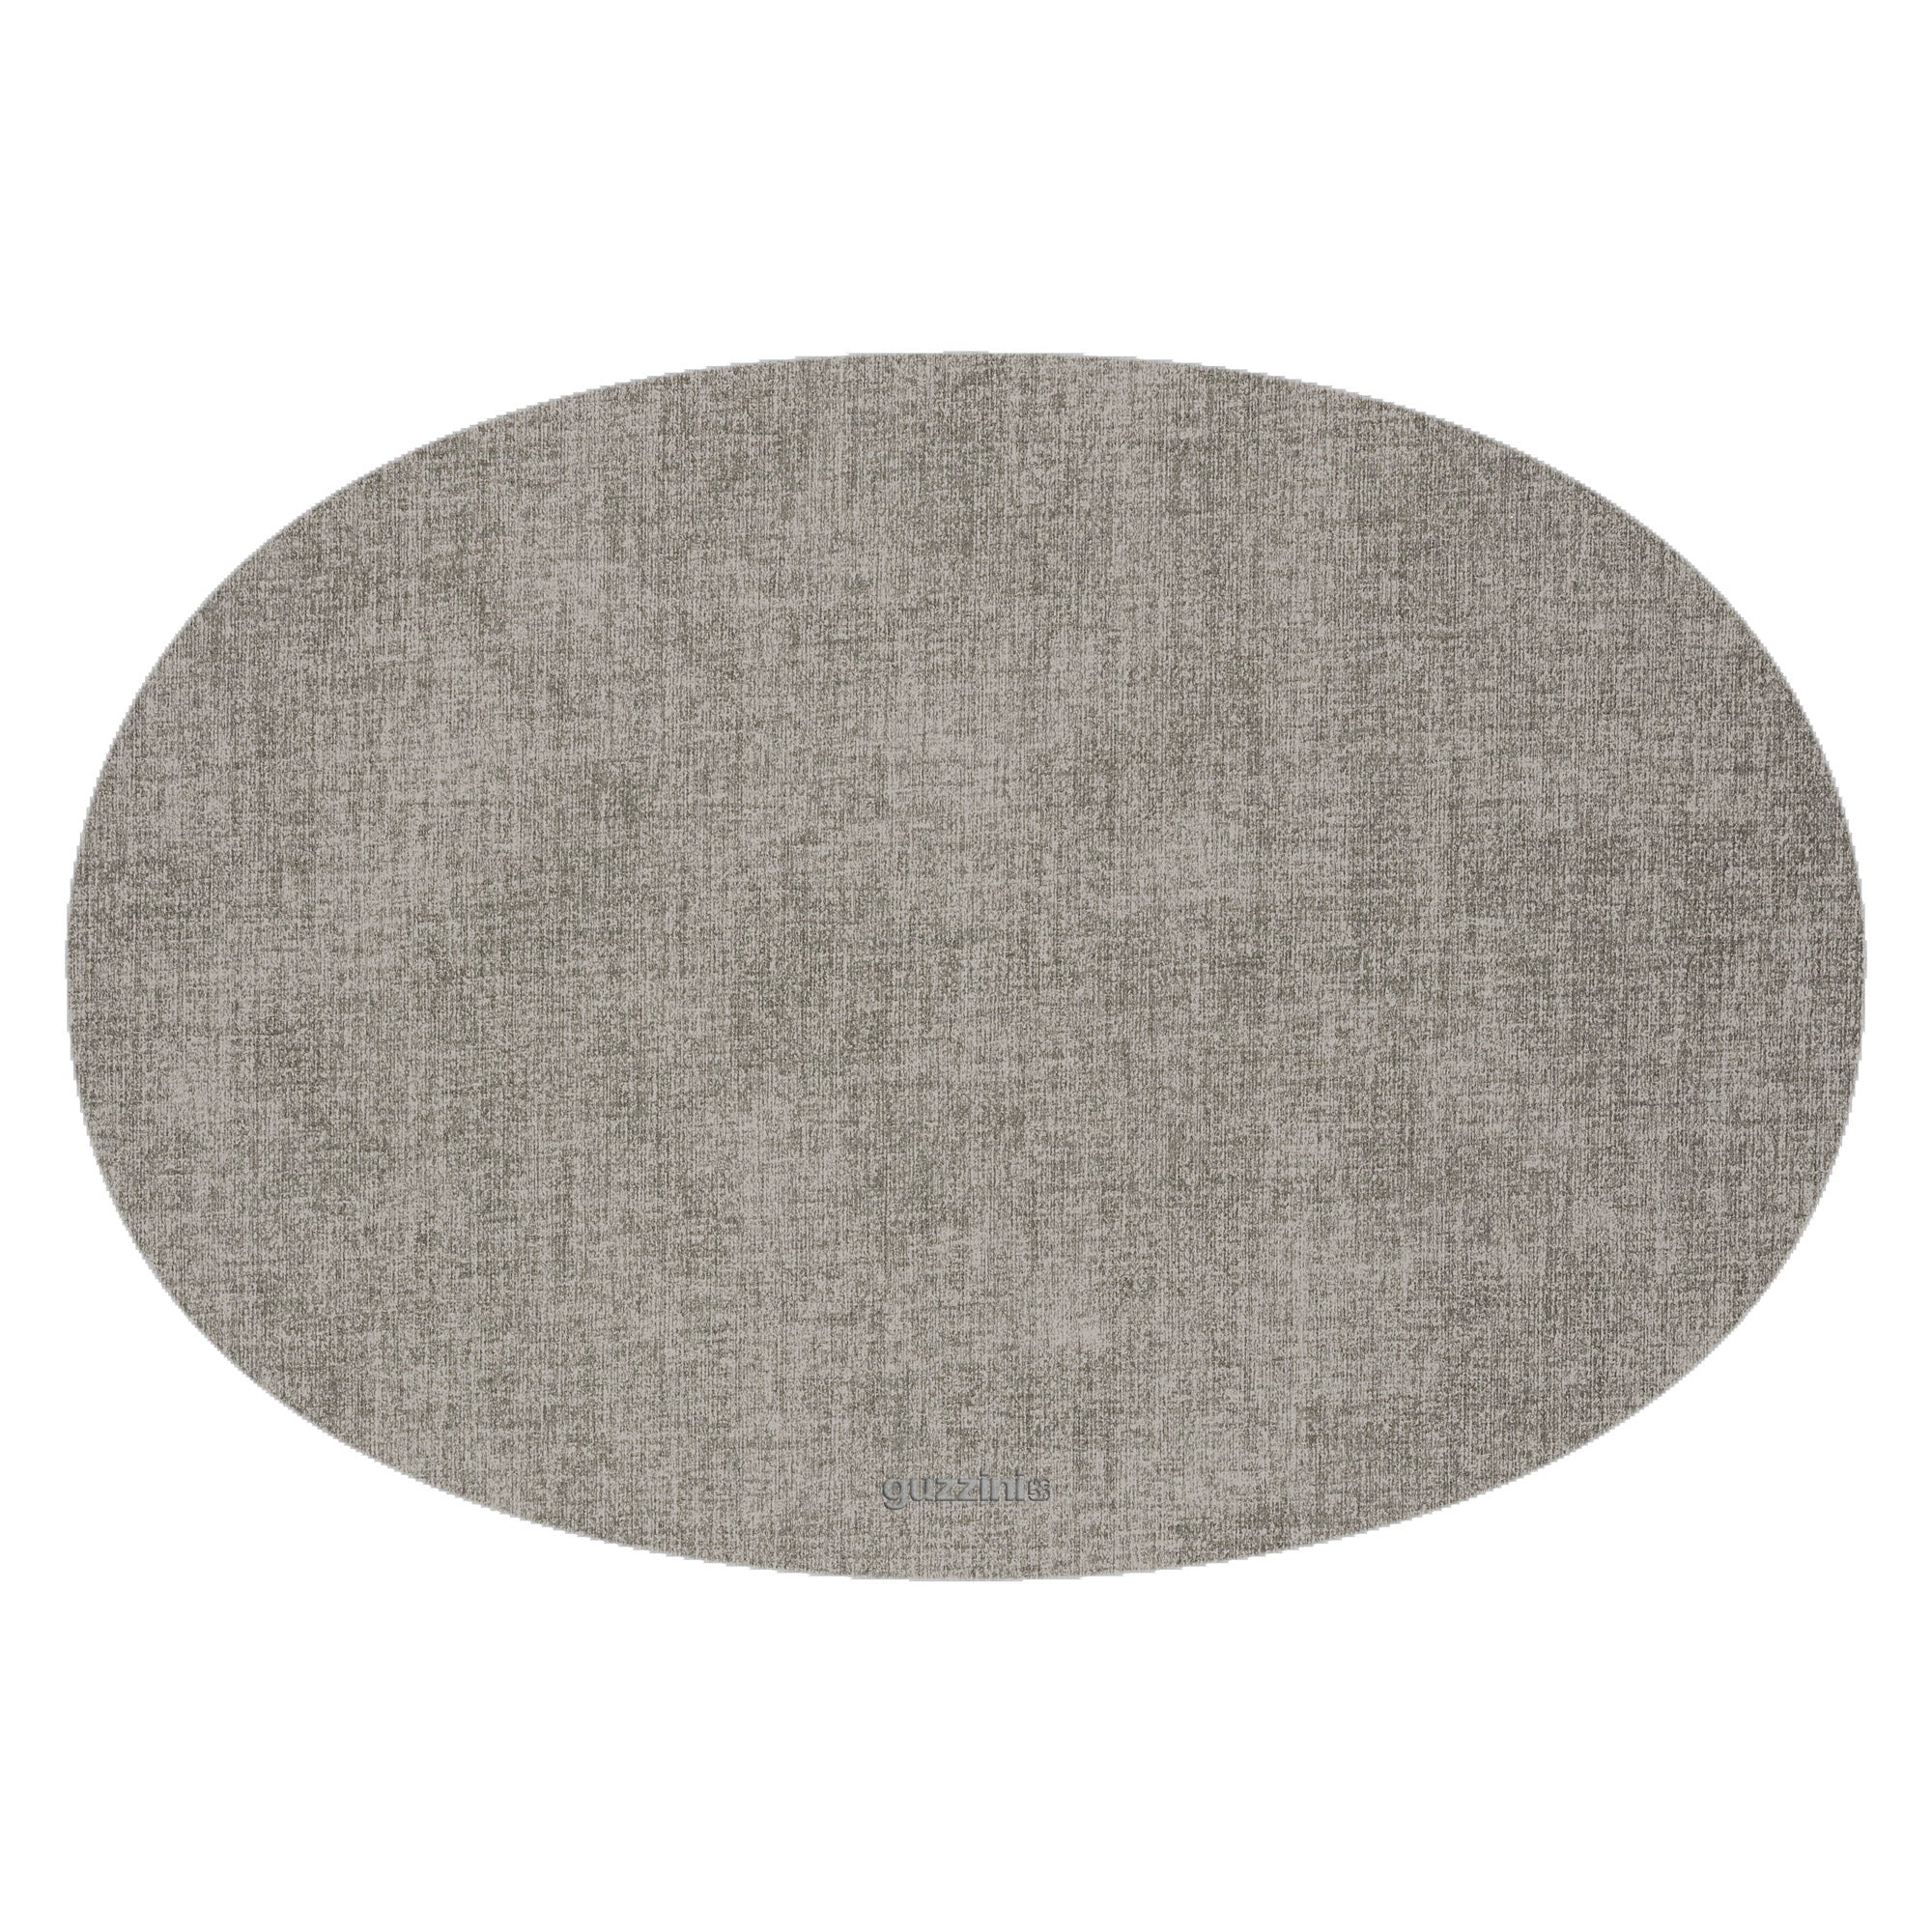 Fabric Oval Reversible Placemat Sky Grey